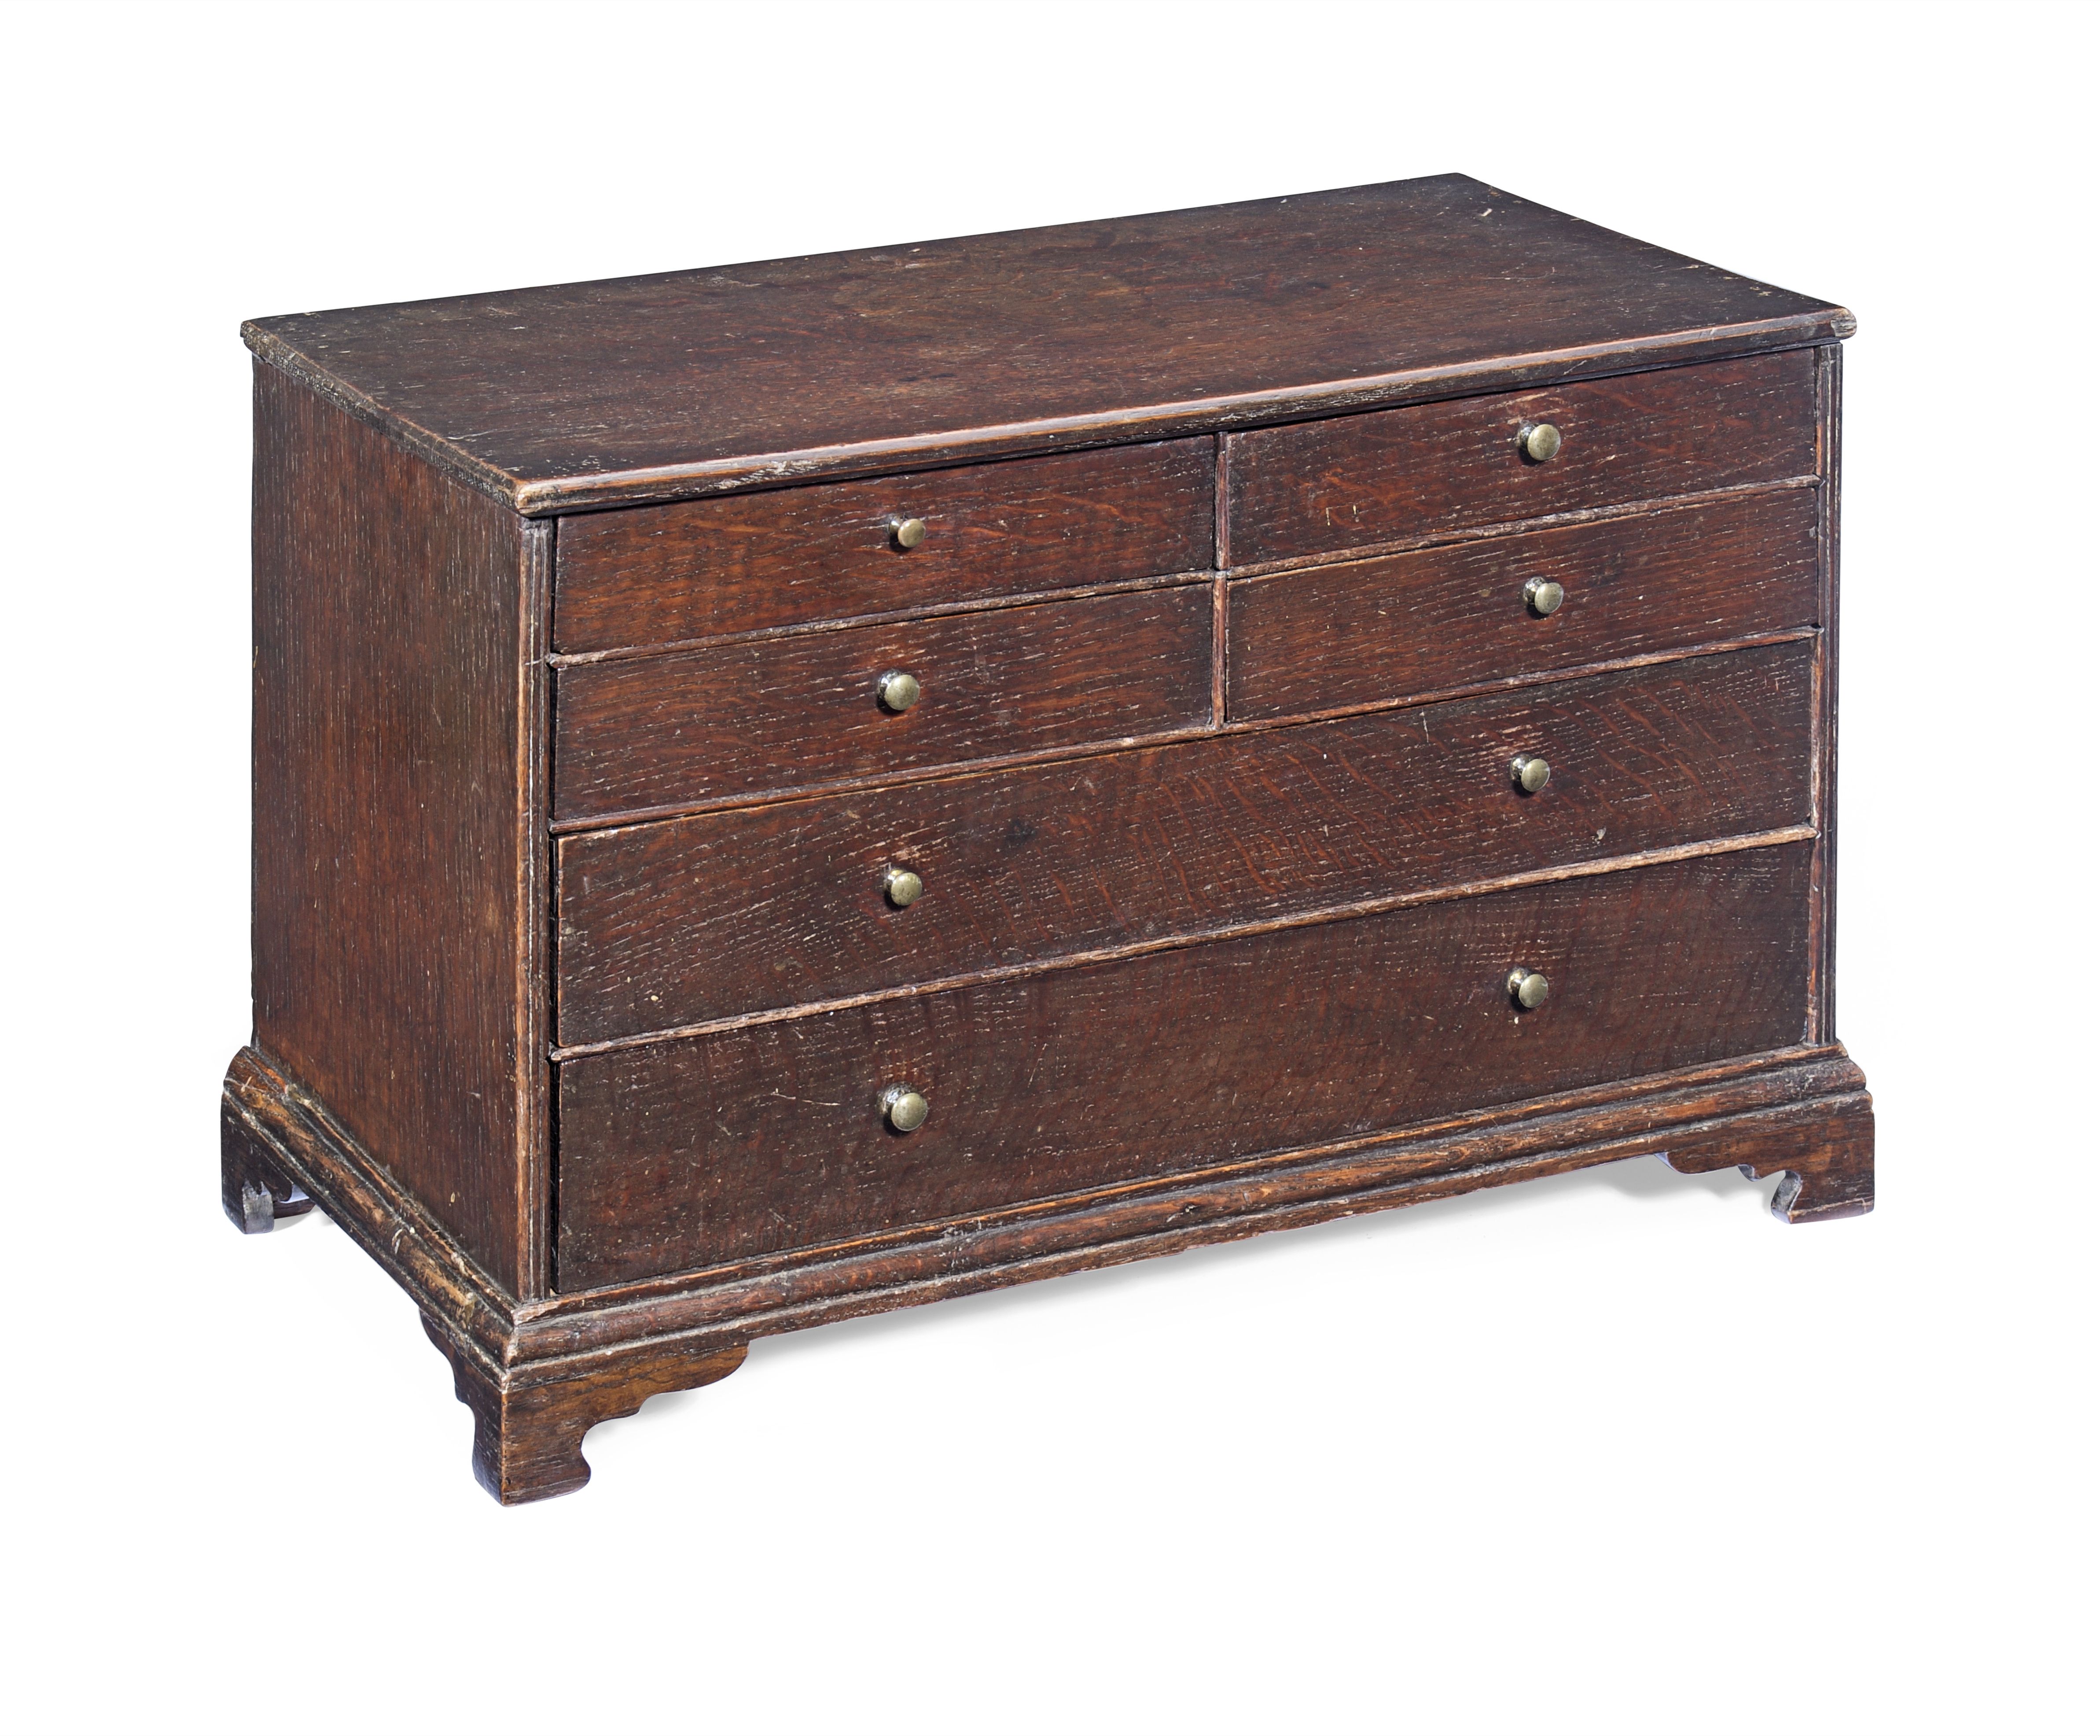 A small George I oak table-top chest of drawers, circa 1720